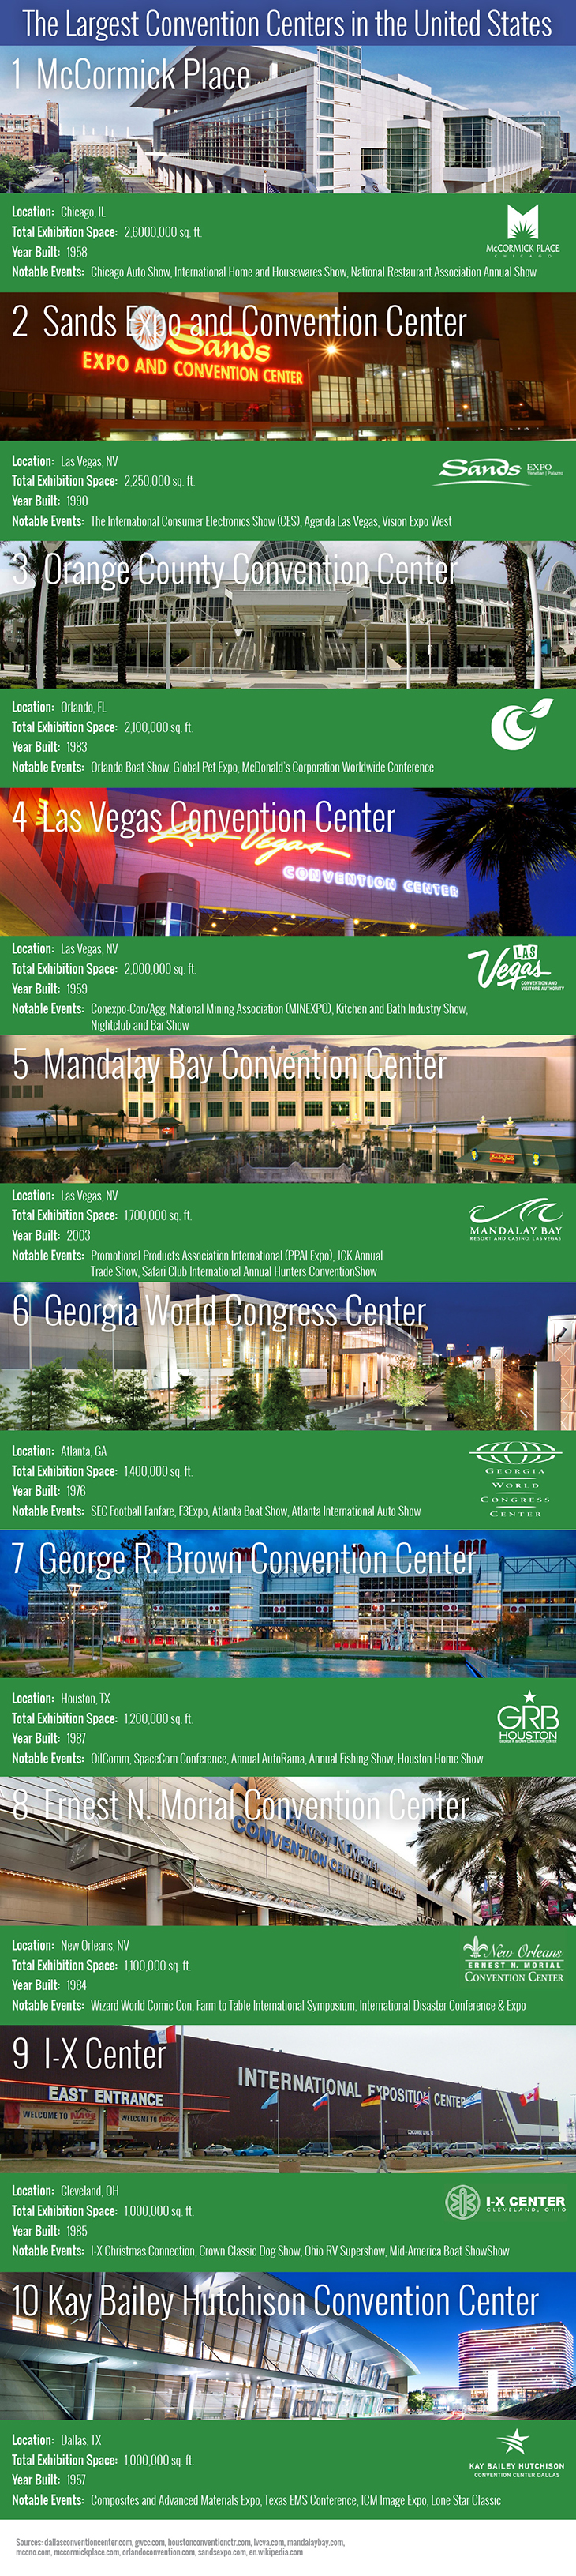 Largest Convention Centers